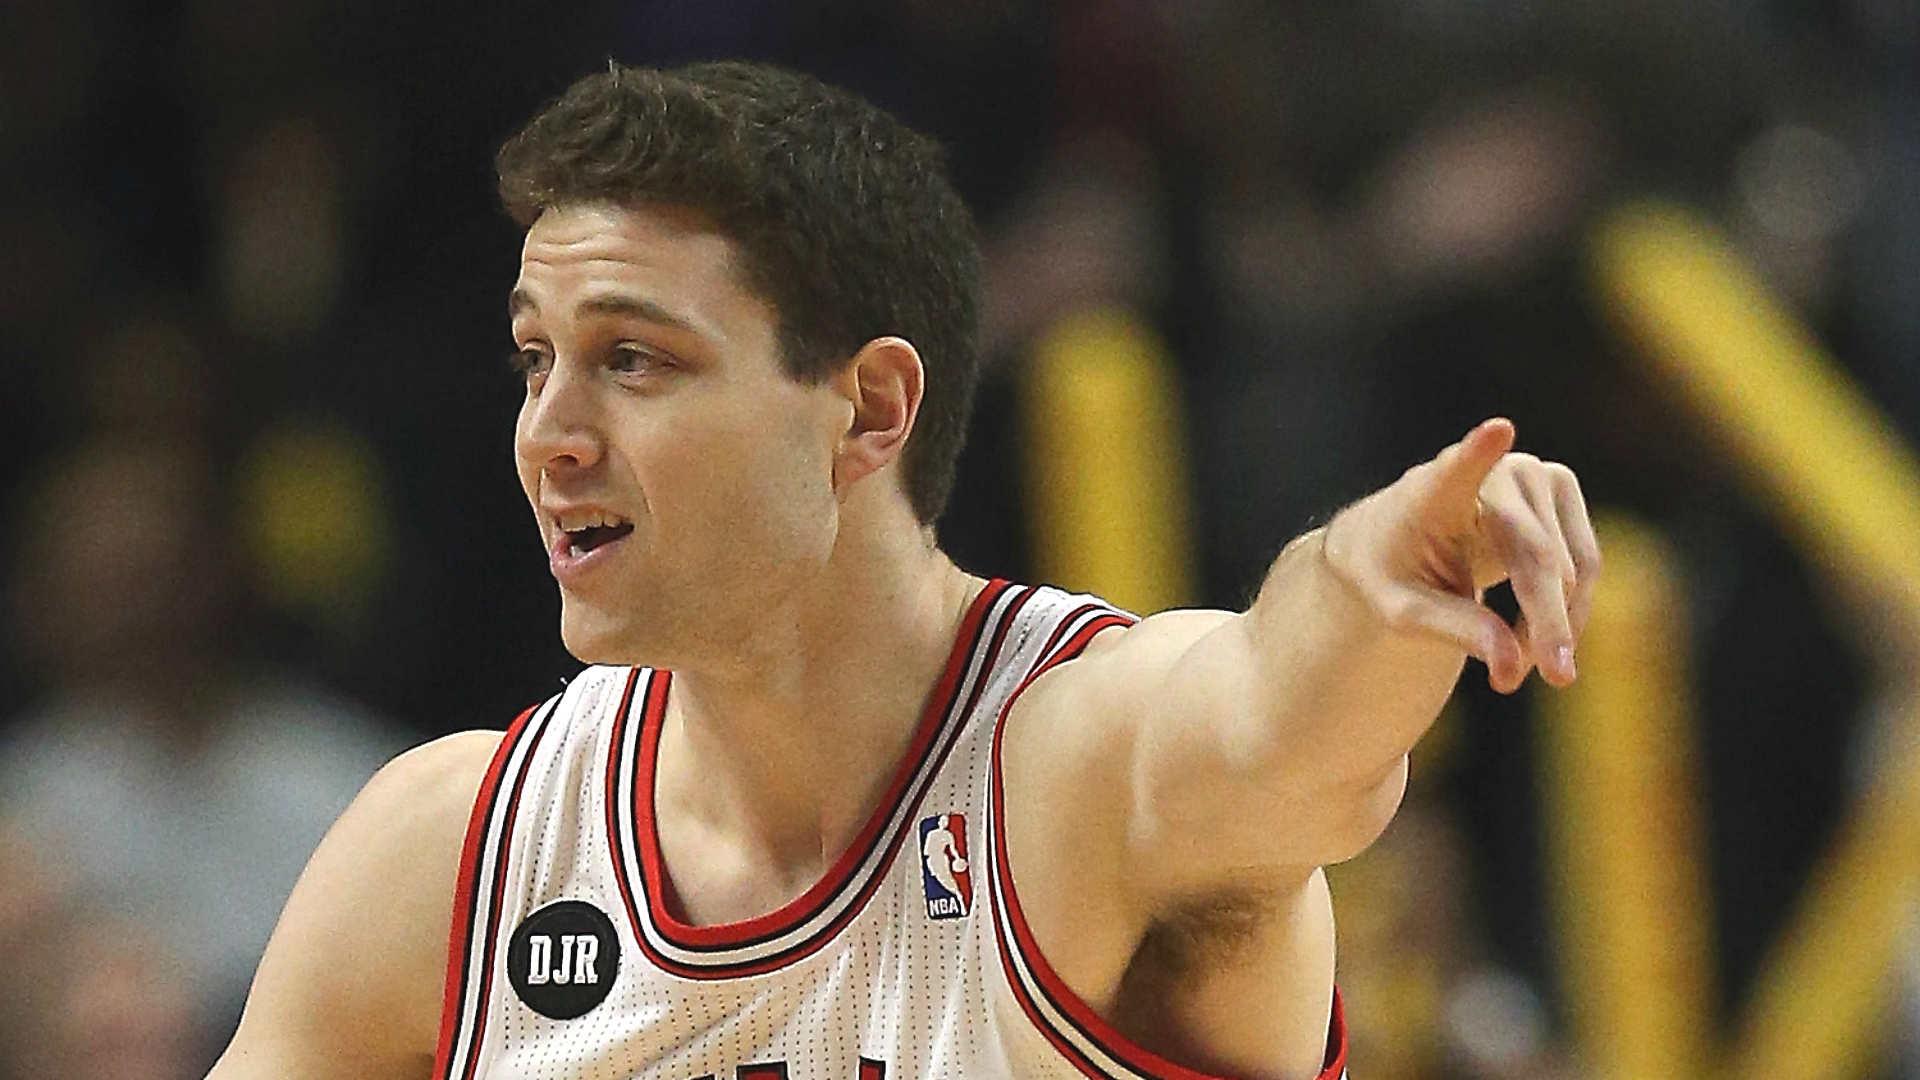 Jimmer Fredette catching NBA's attention, report says. NBA